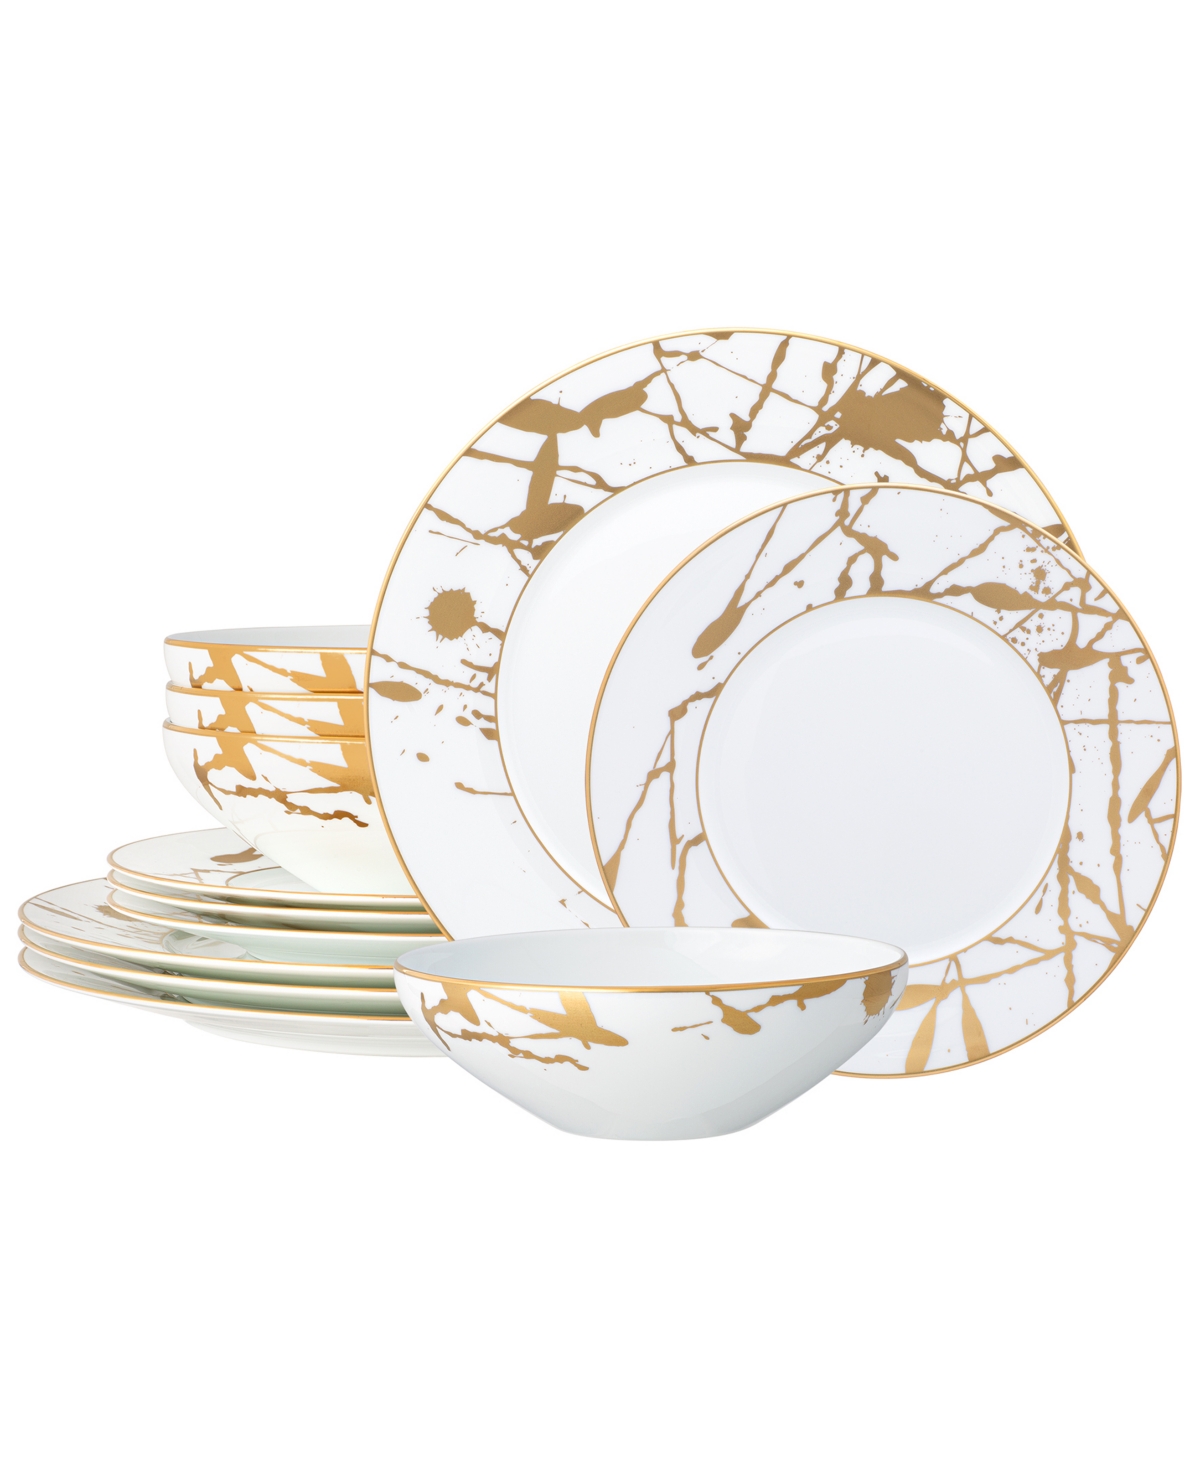 Noritake Raptures Gold 12 Piece Set, Service For 4 In White And Gold-tone